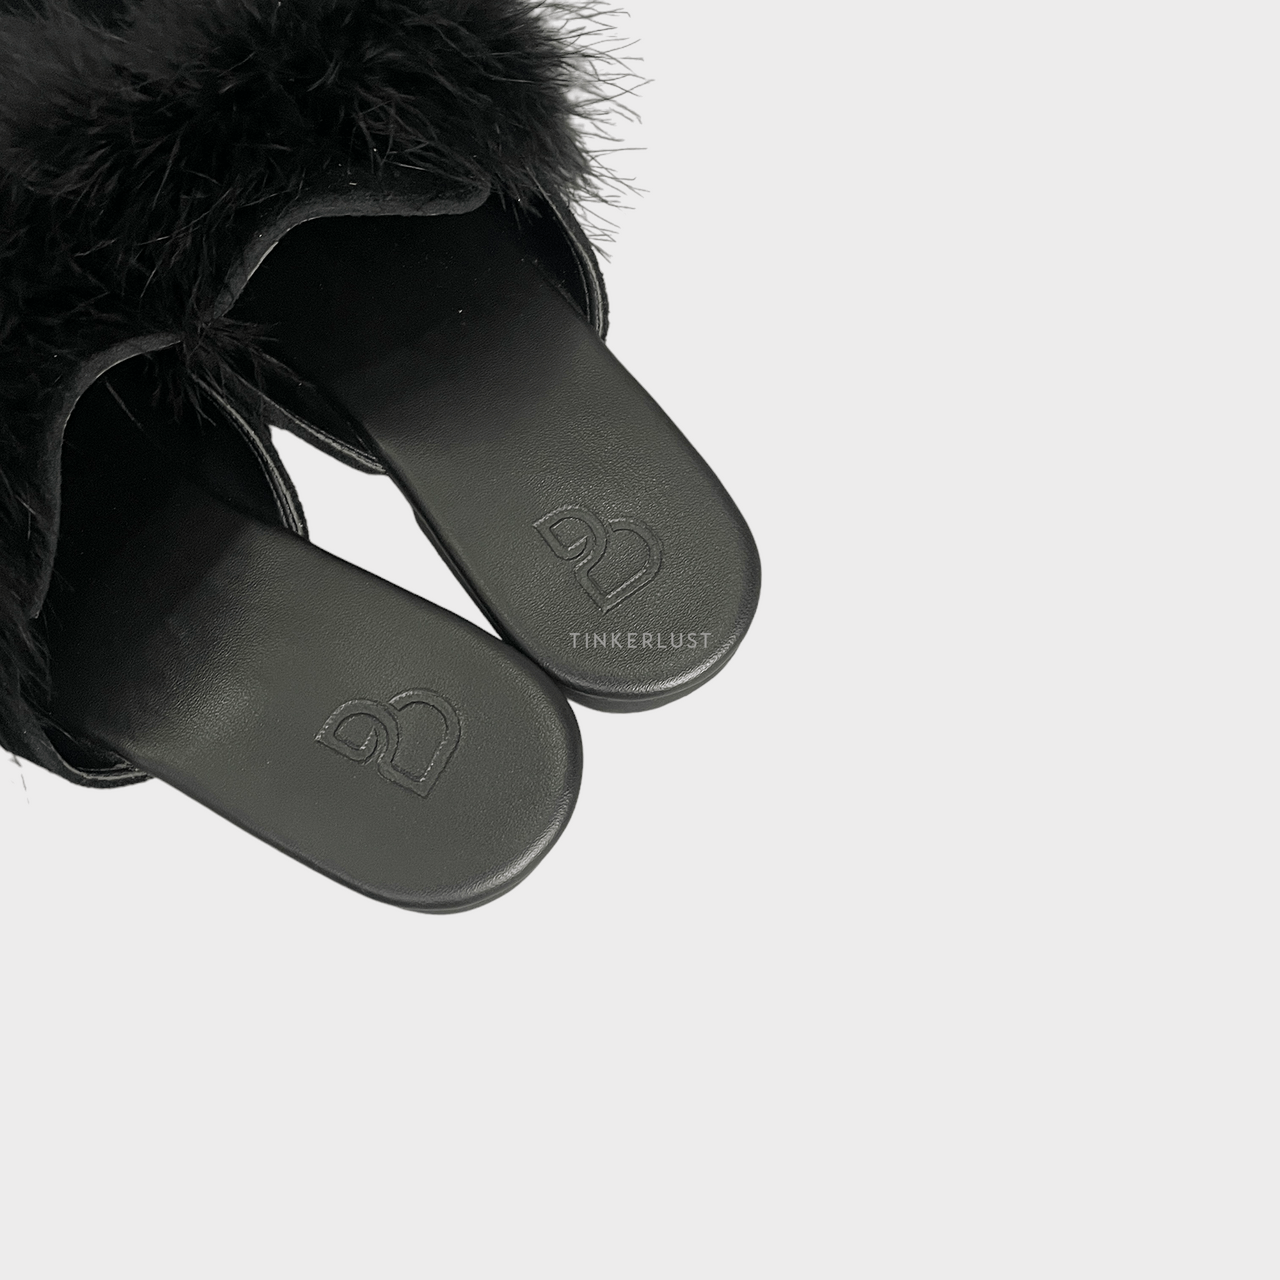 Private Collection Black Mules Sandals